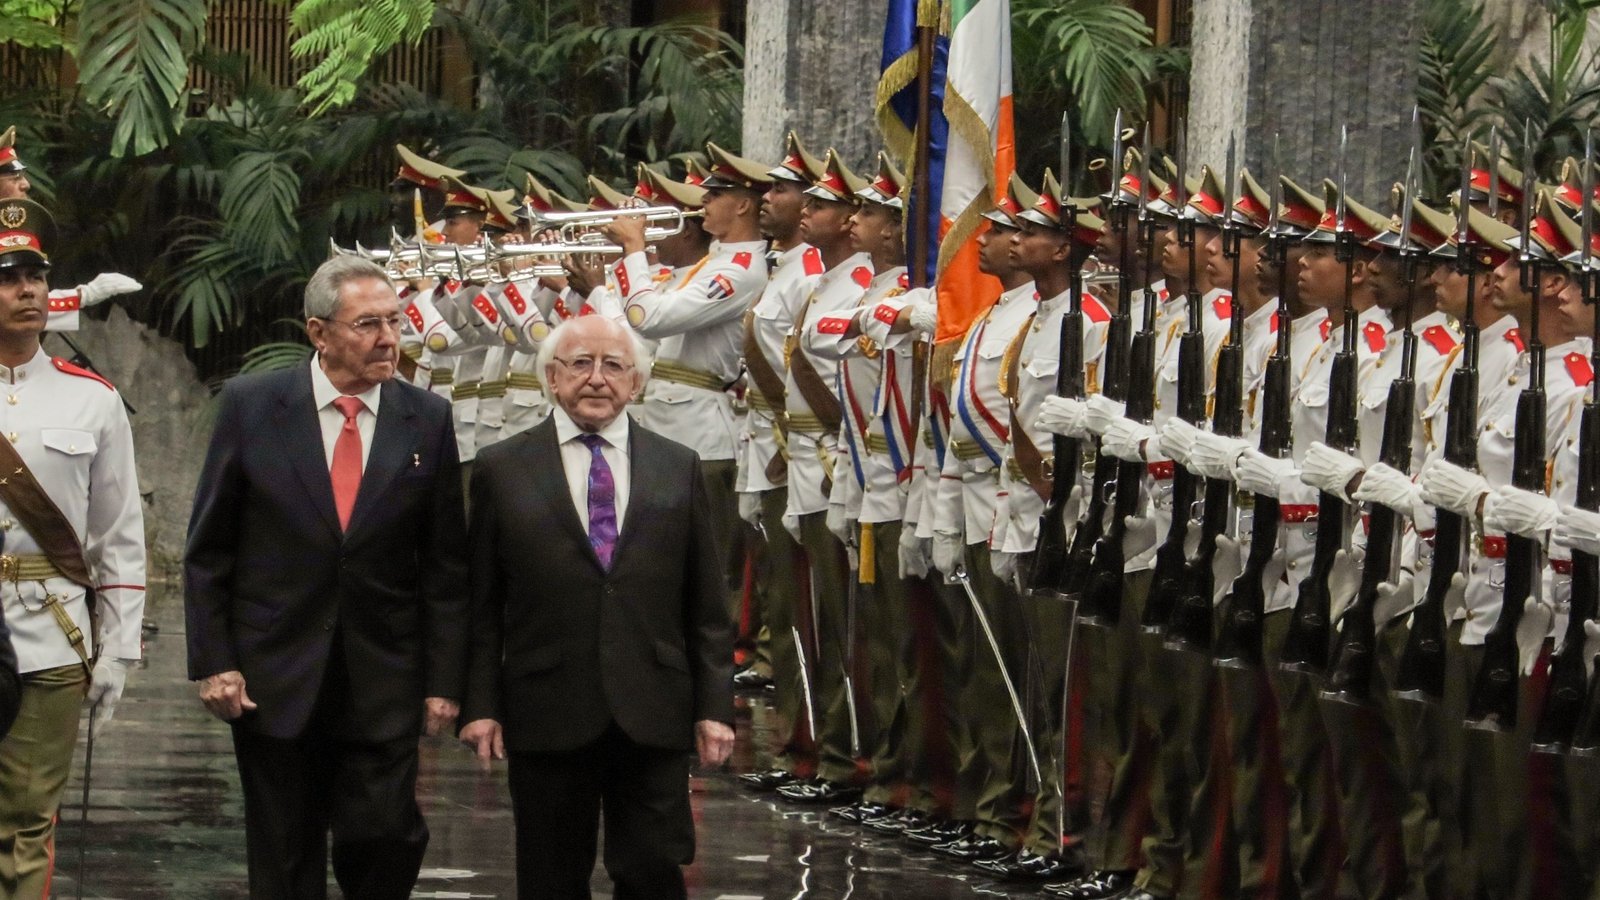 Image - President Higgins and his Cuban counterpart Raul Castro in February 2017